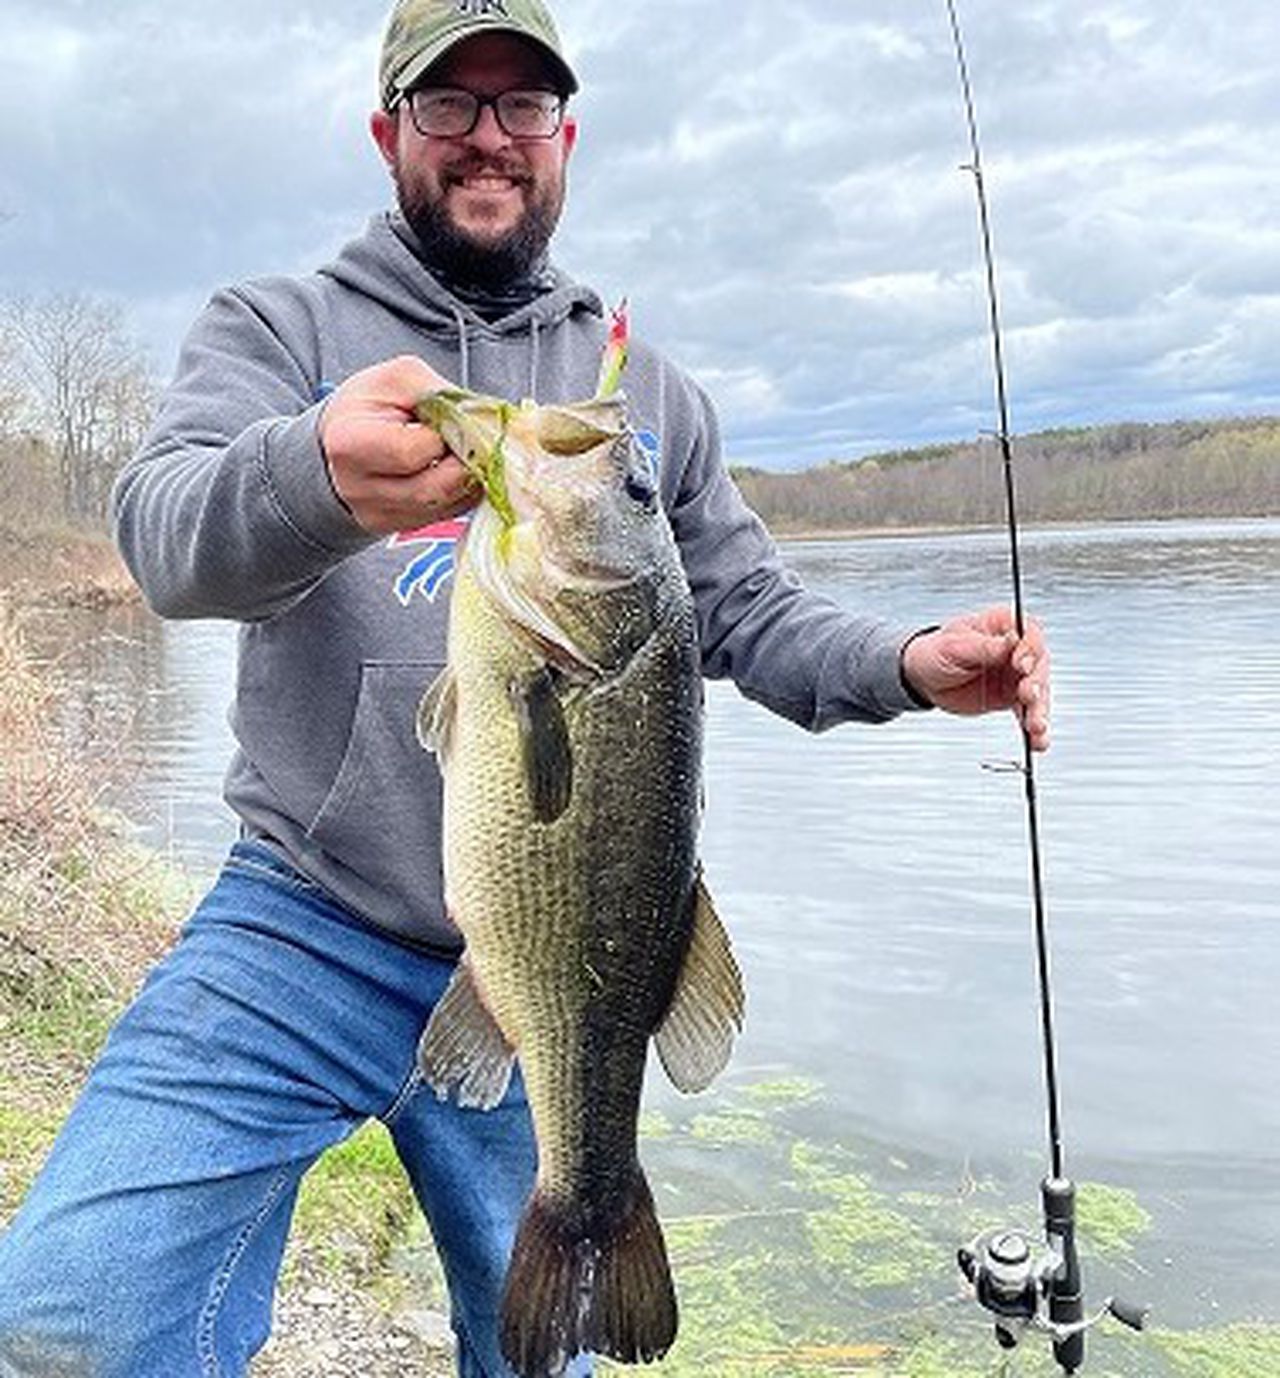 New York Angler Releases a State-Record Bass